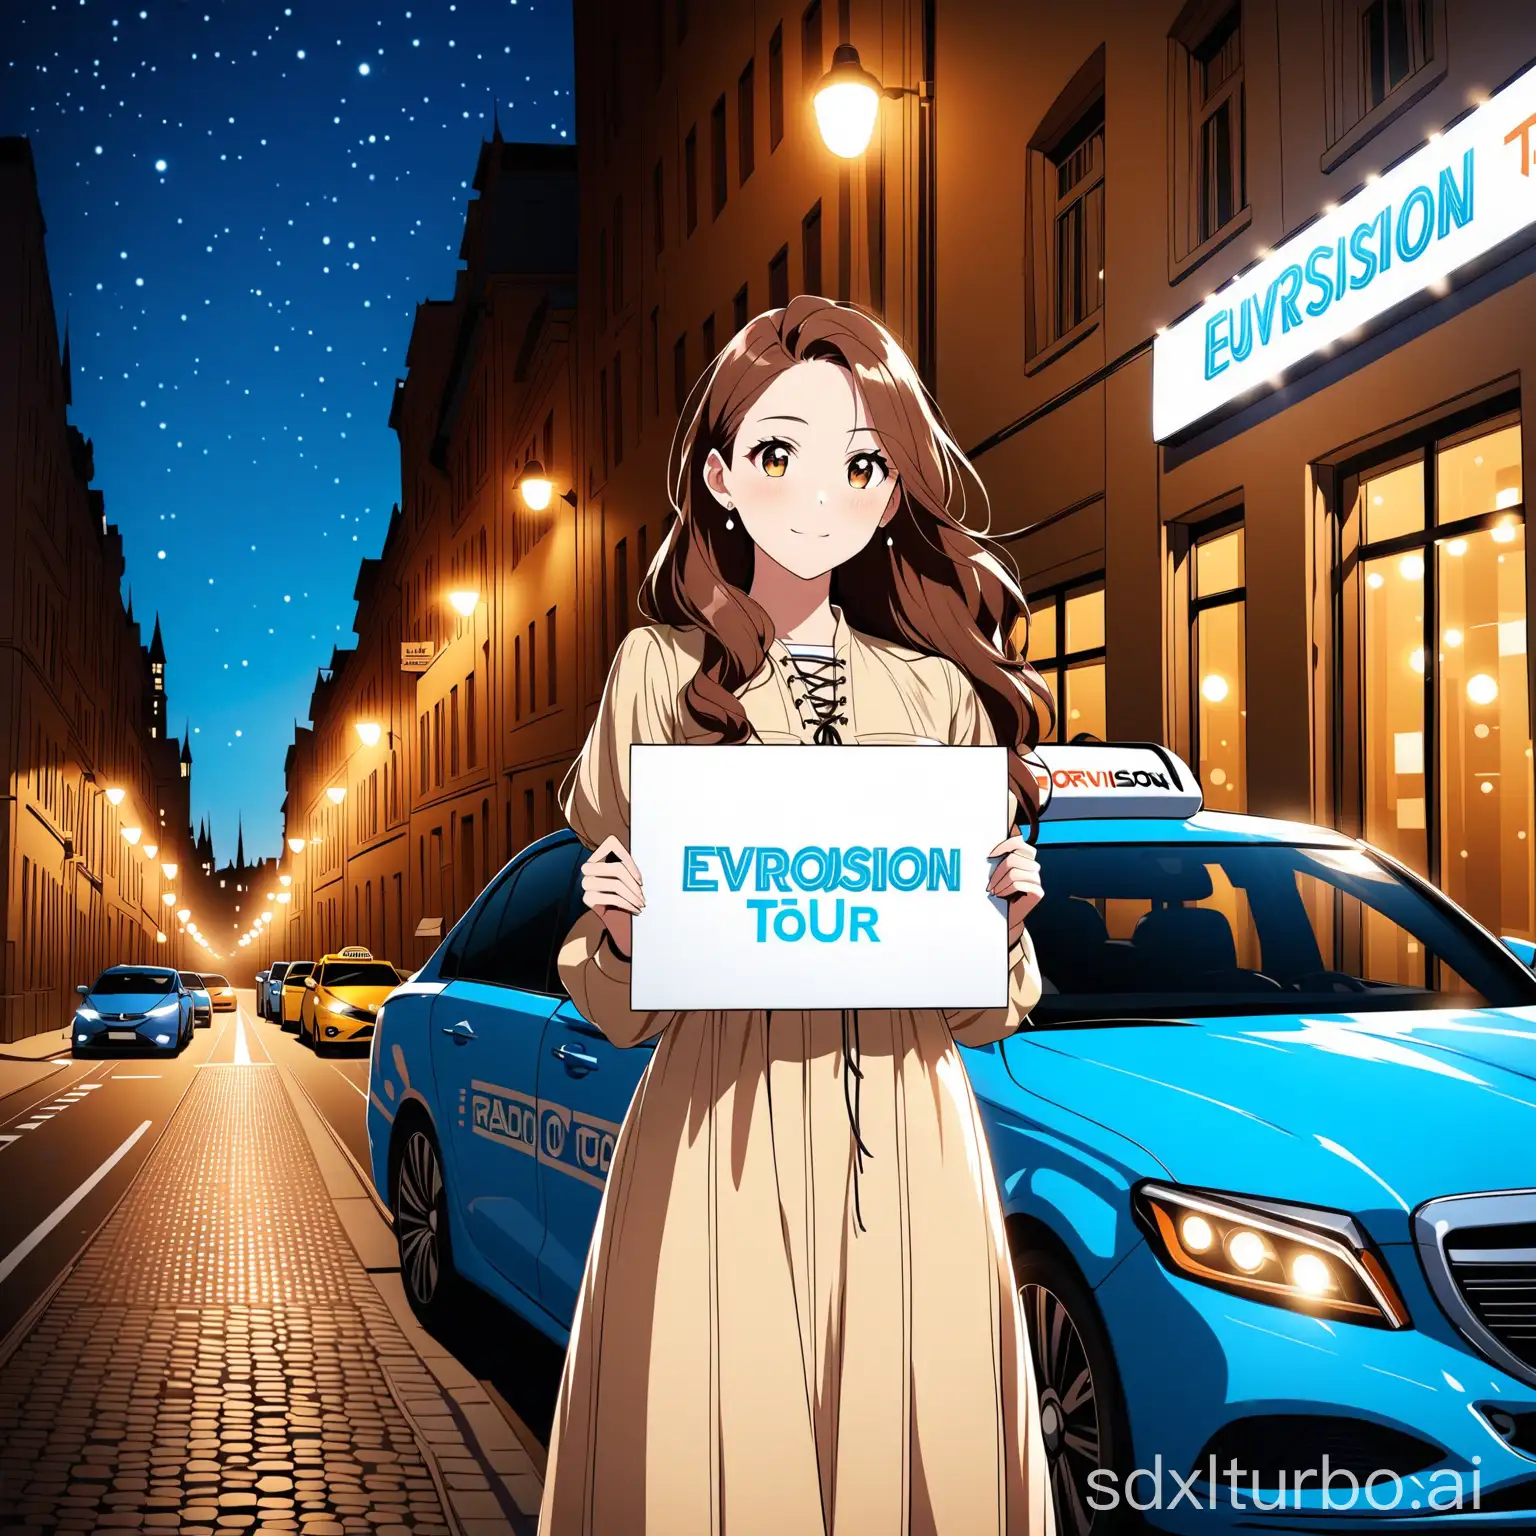 Elegant-Woman-Holding-Eurovision-Tour-Sign-by-Radio-Taxi-at-Night